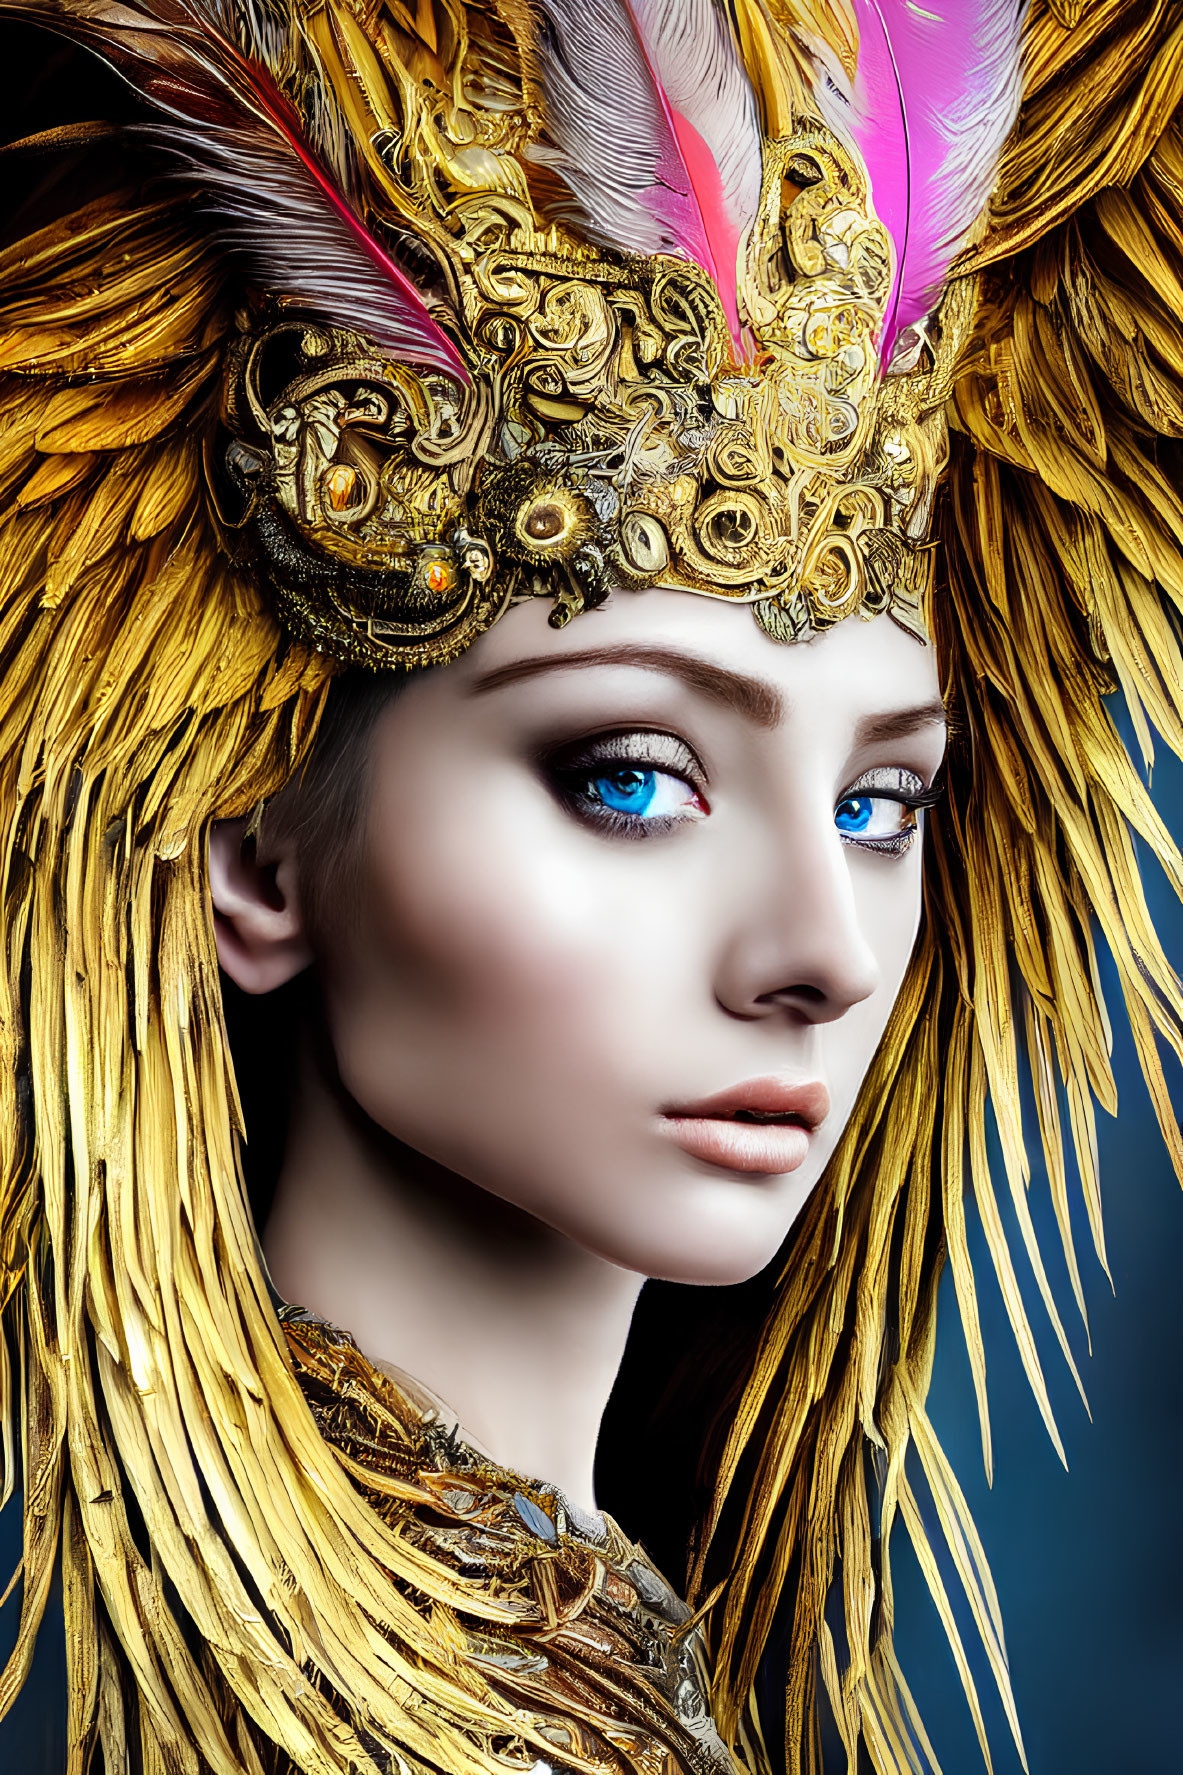 Woman with Striking Blue Eyes in Ornate Golden Feathered Headdress